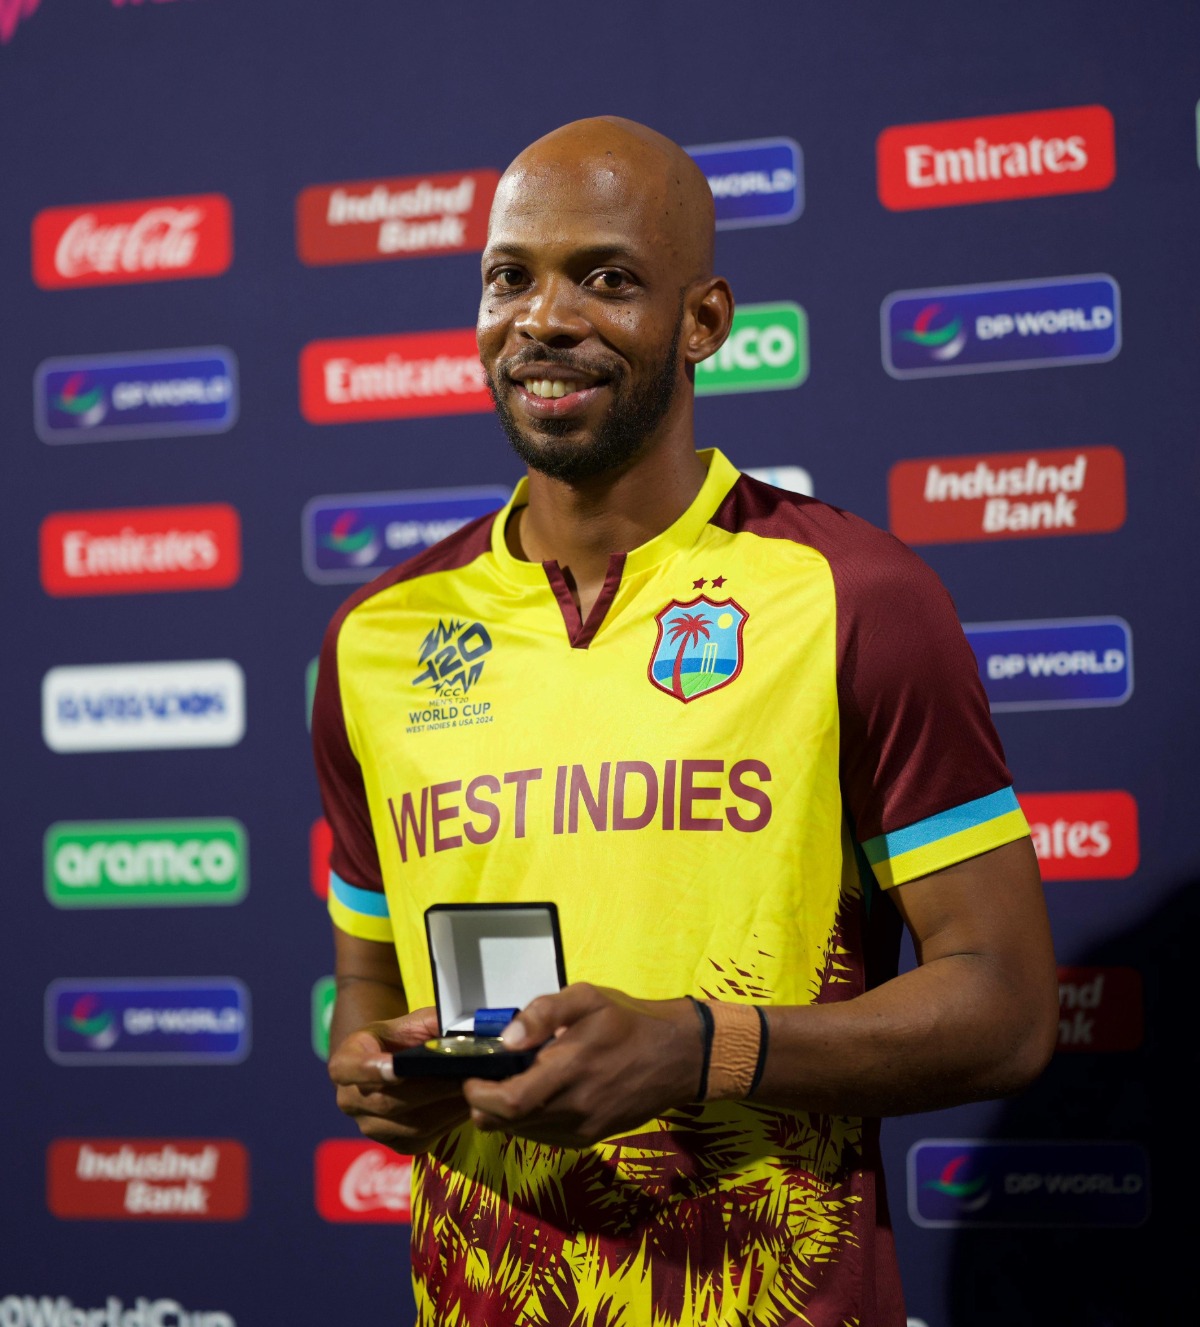 Roston Chase was named Player of the match for his spell of 3 for 19 off his 4 overs